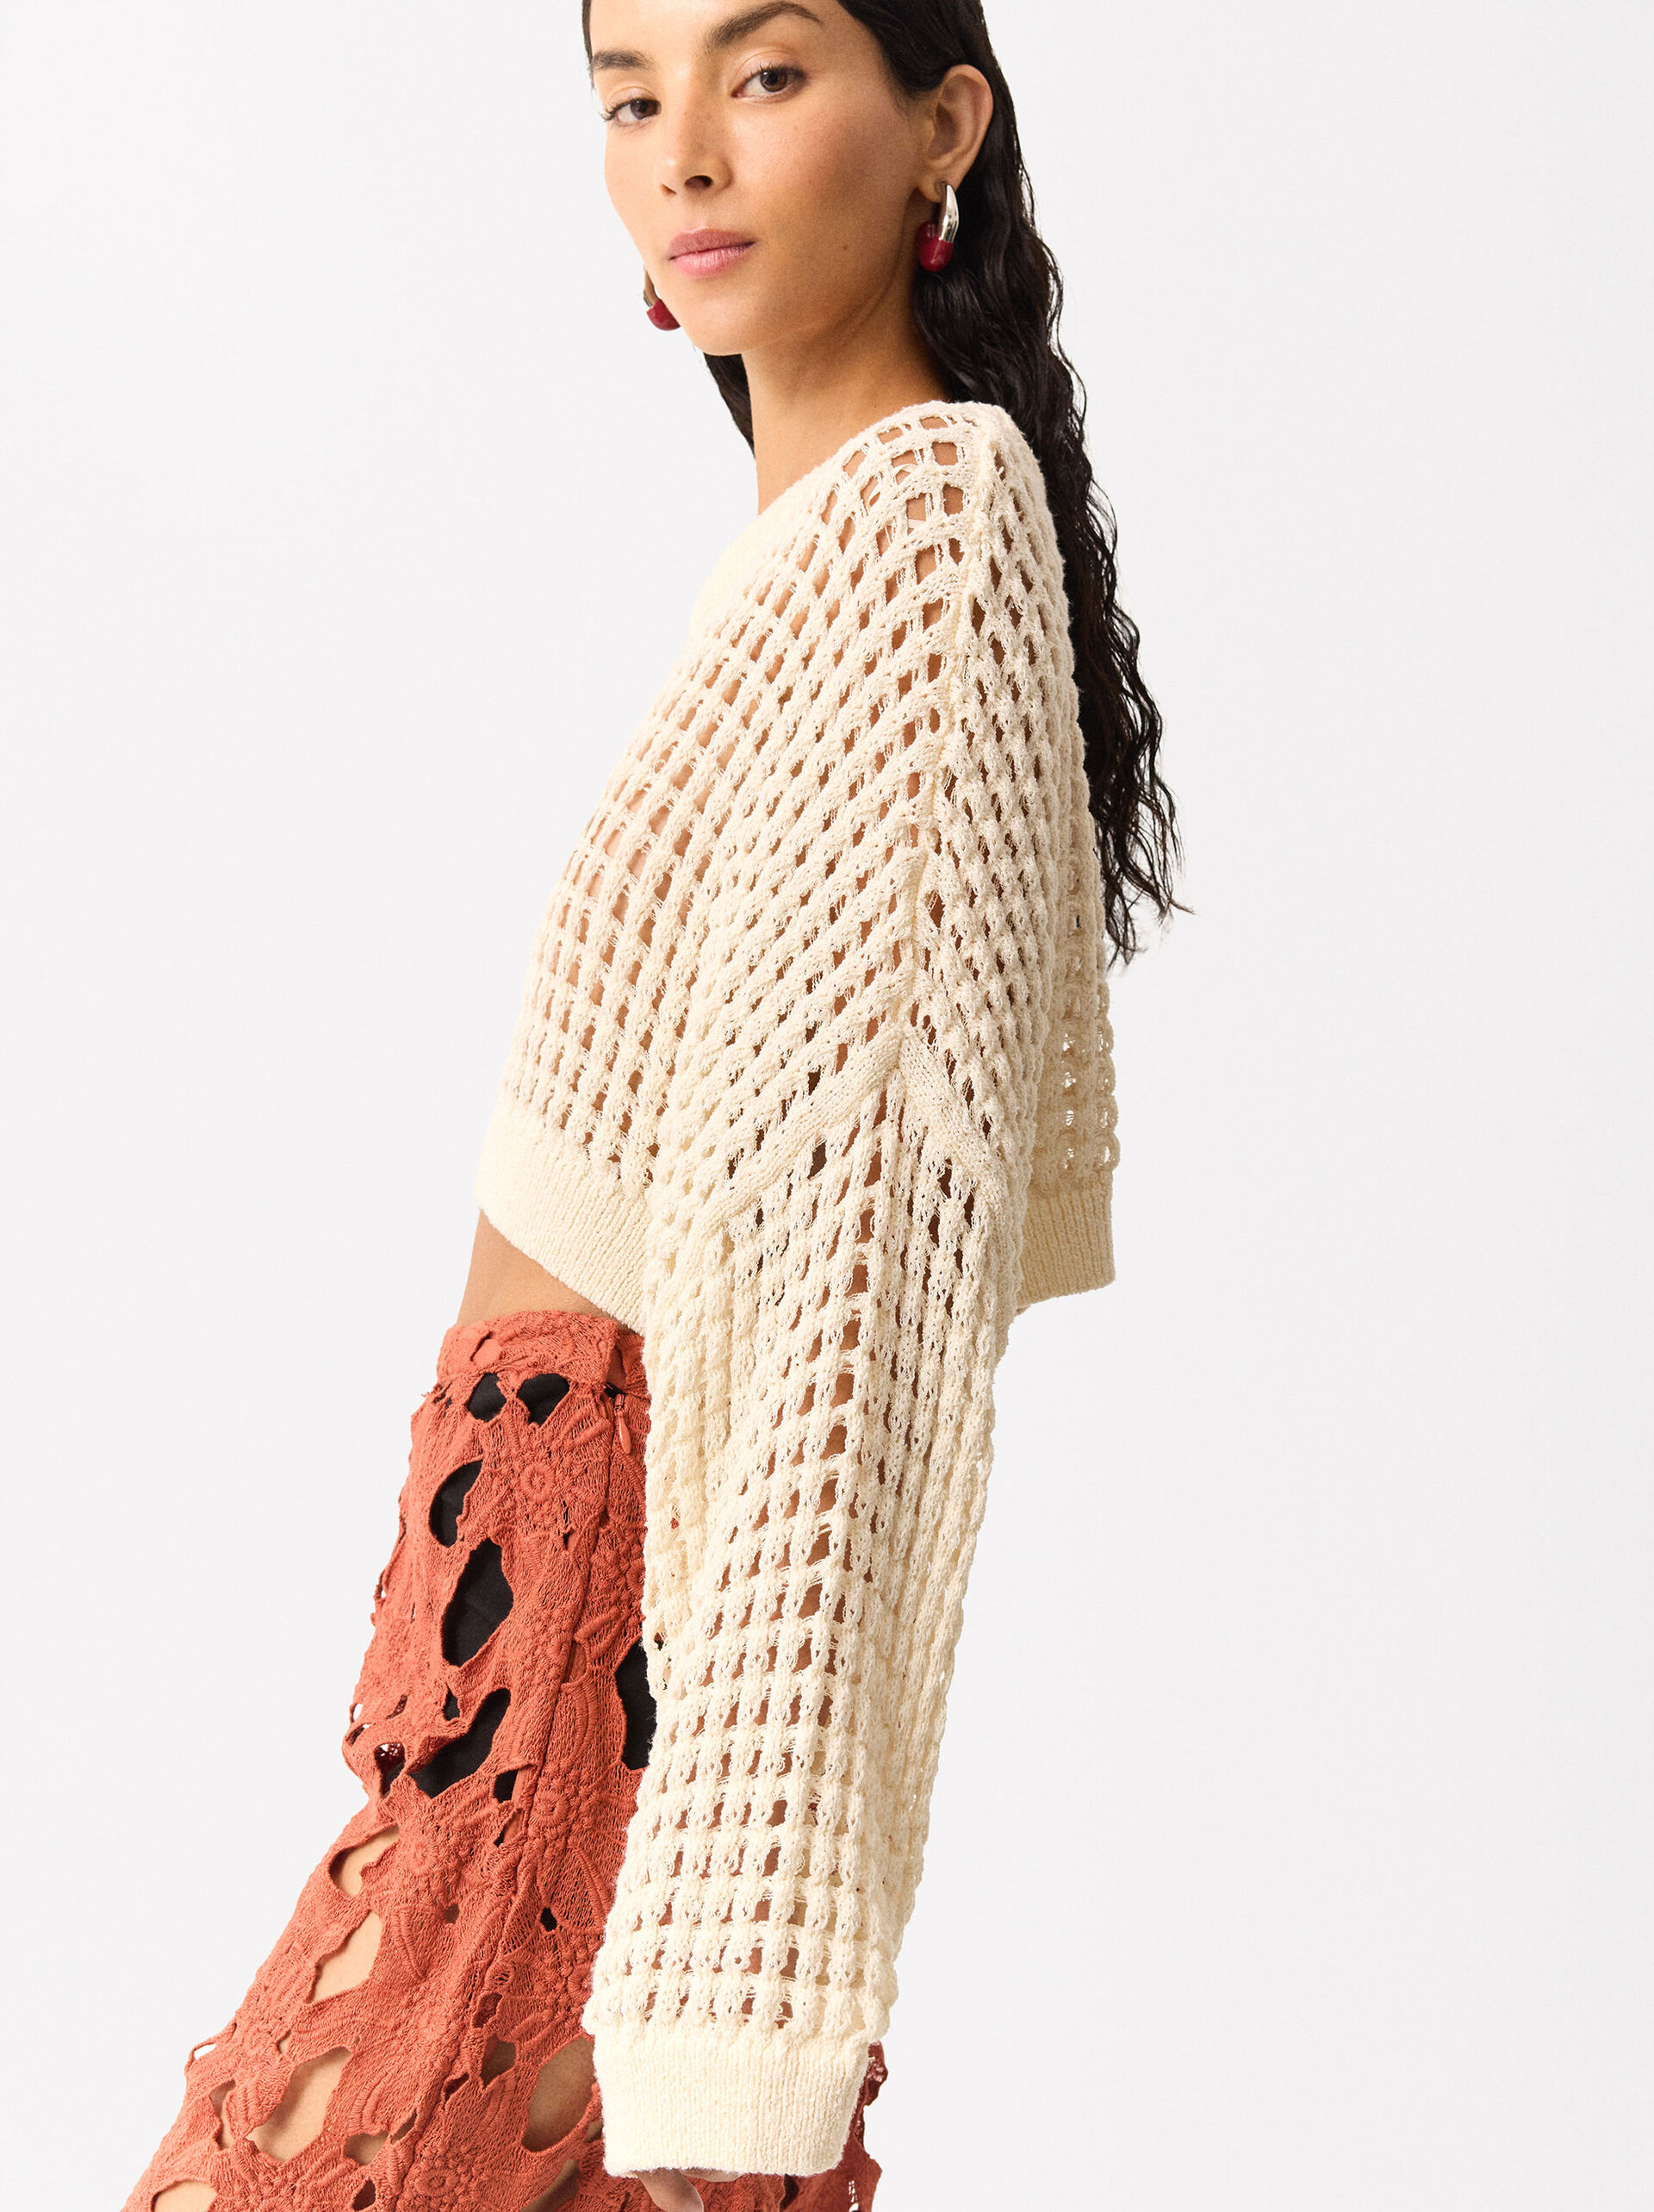 Online Exclusive - Round-Neck Knit Sweater image number 3.0